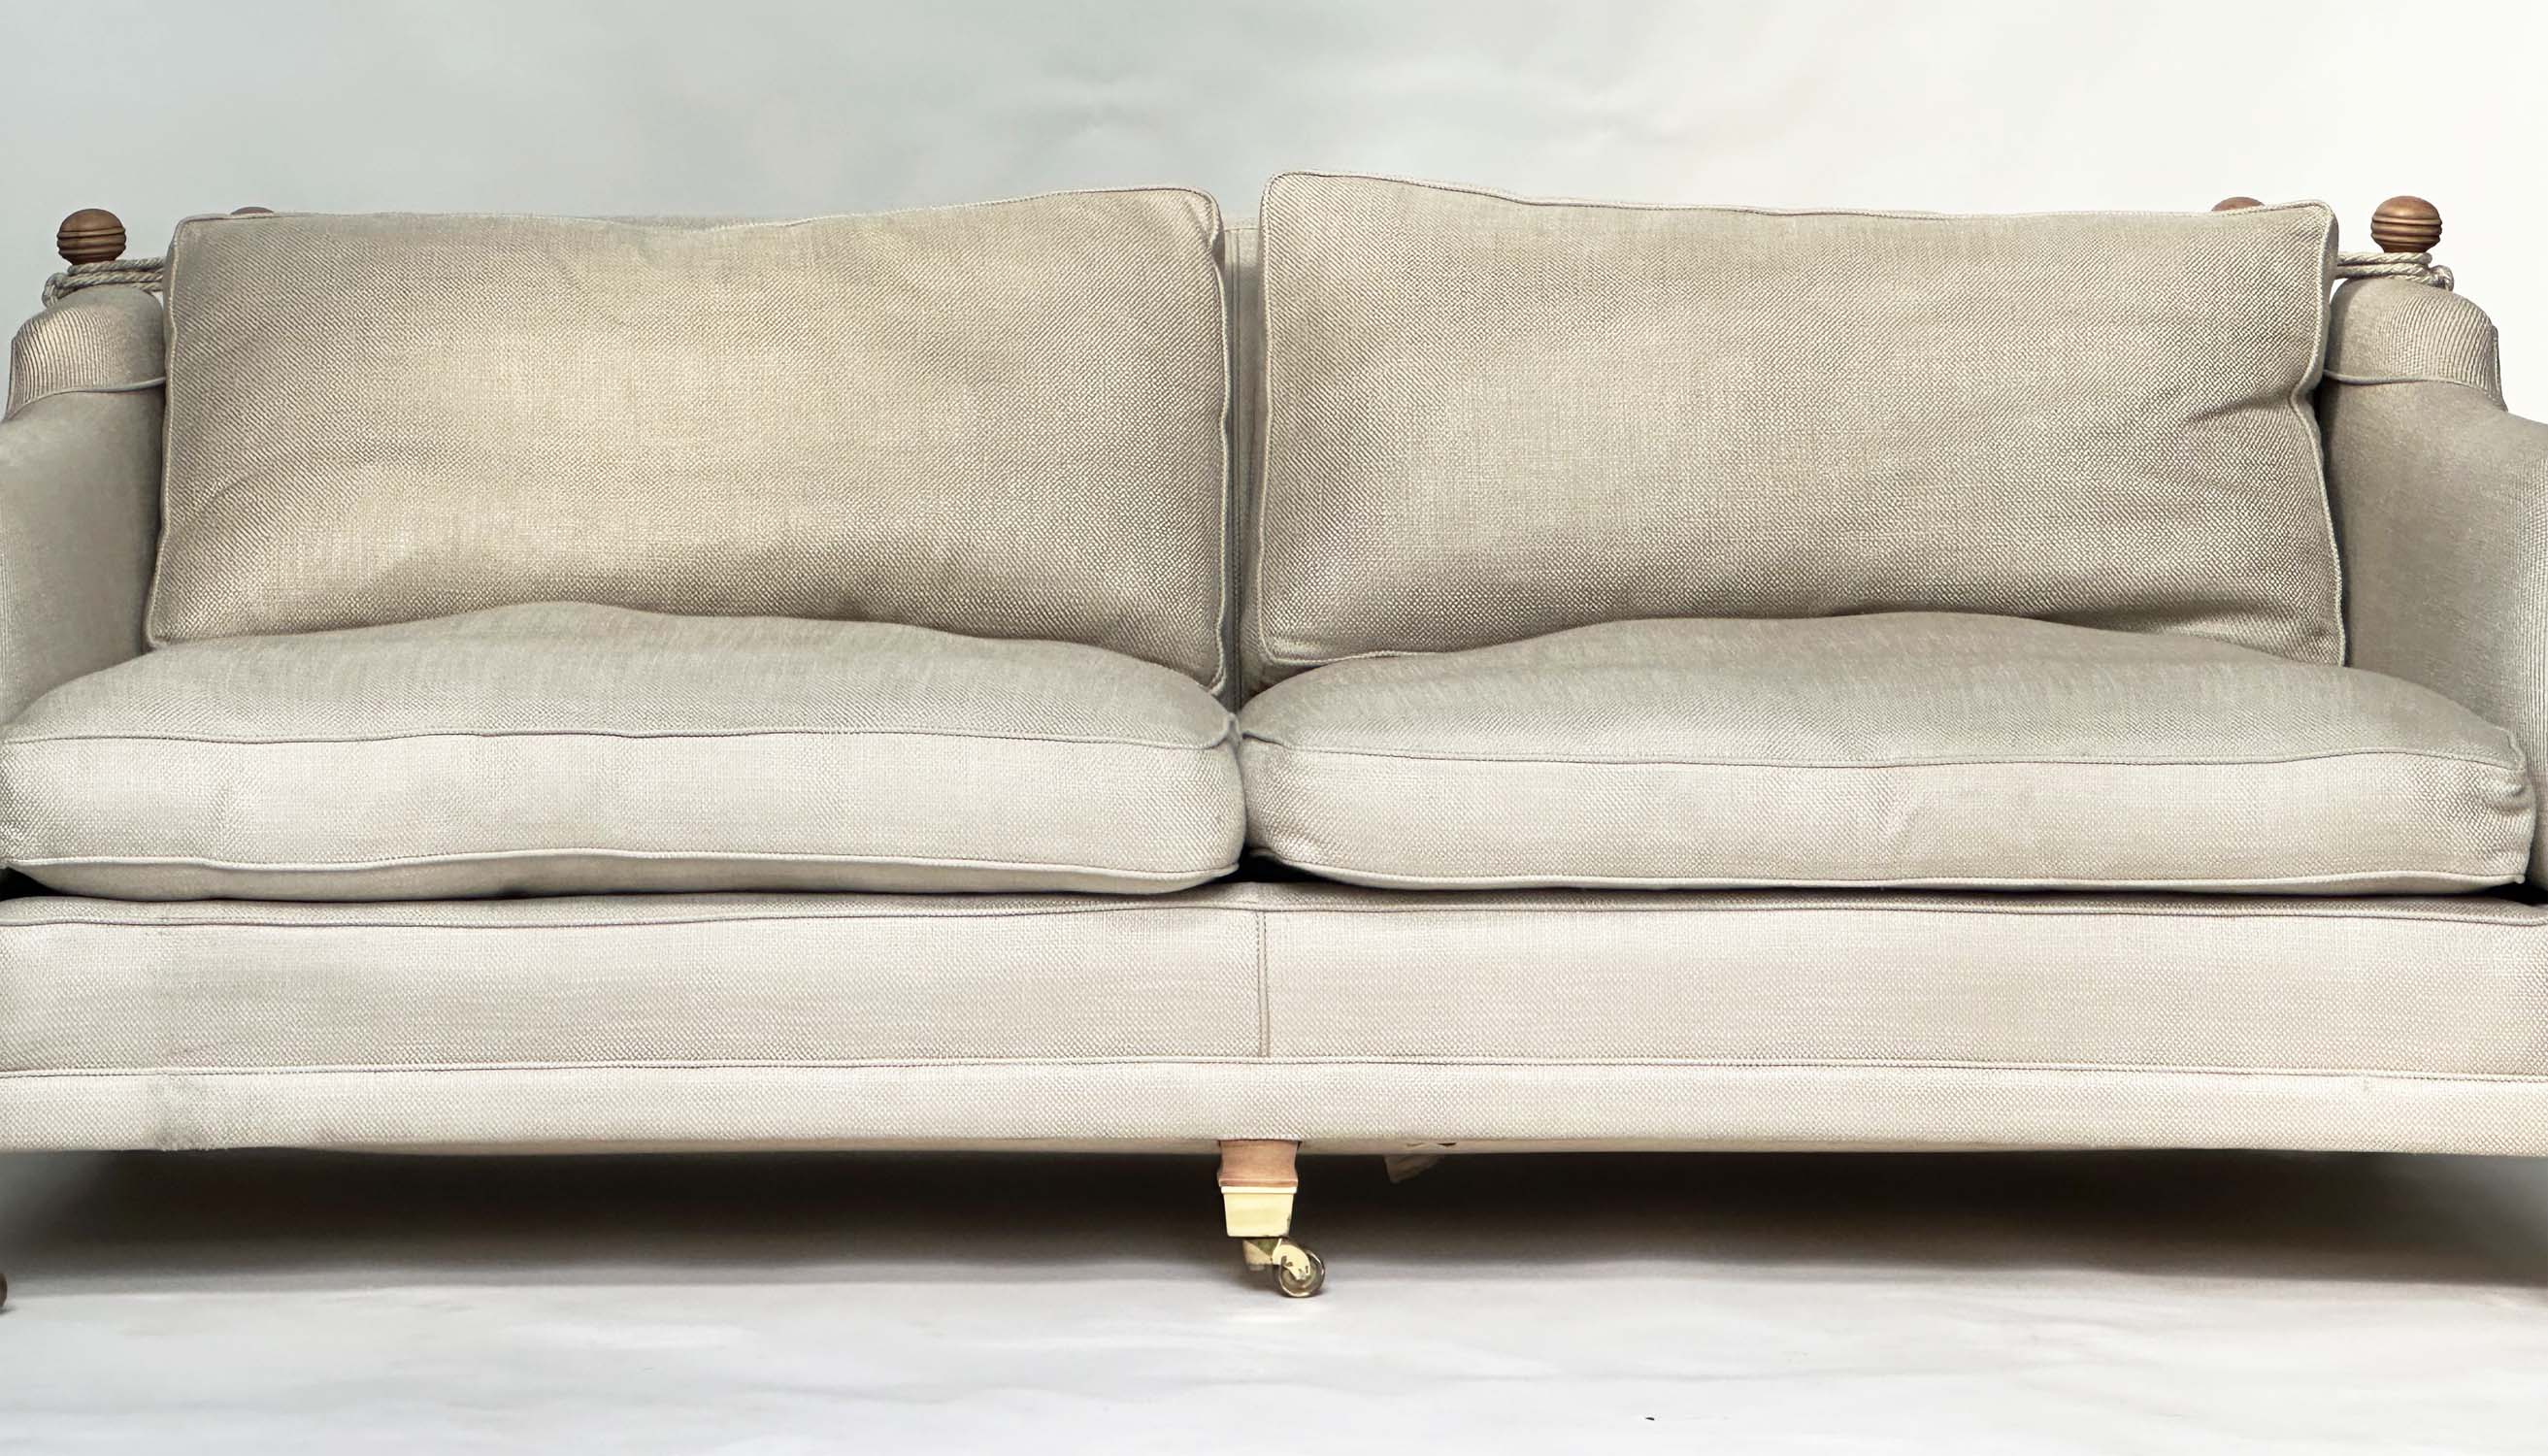 KNOLL SOFA BY DURESTA, grey linen upholstered with down swept arms, feather filled cushions and - Image 13 of 14